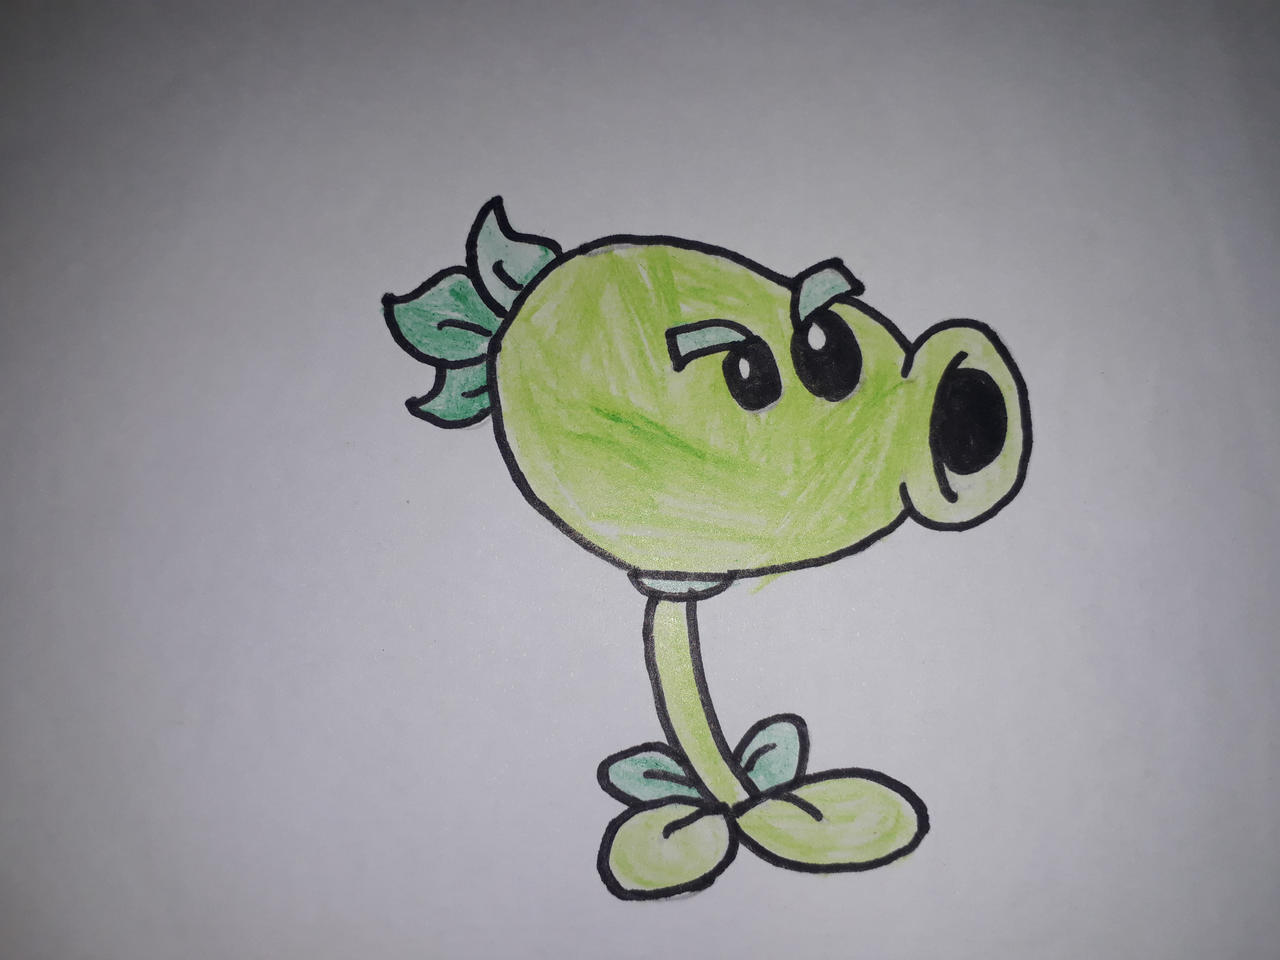 How to Draw a Zombie from Plants vs Zombies 